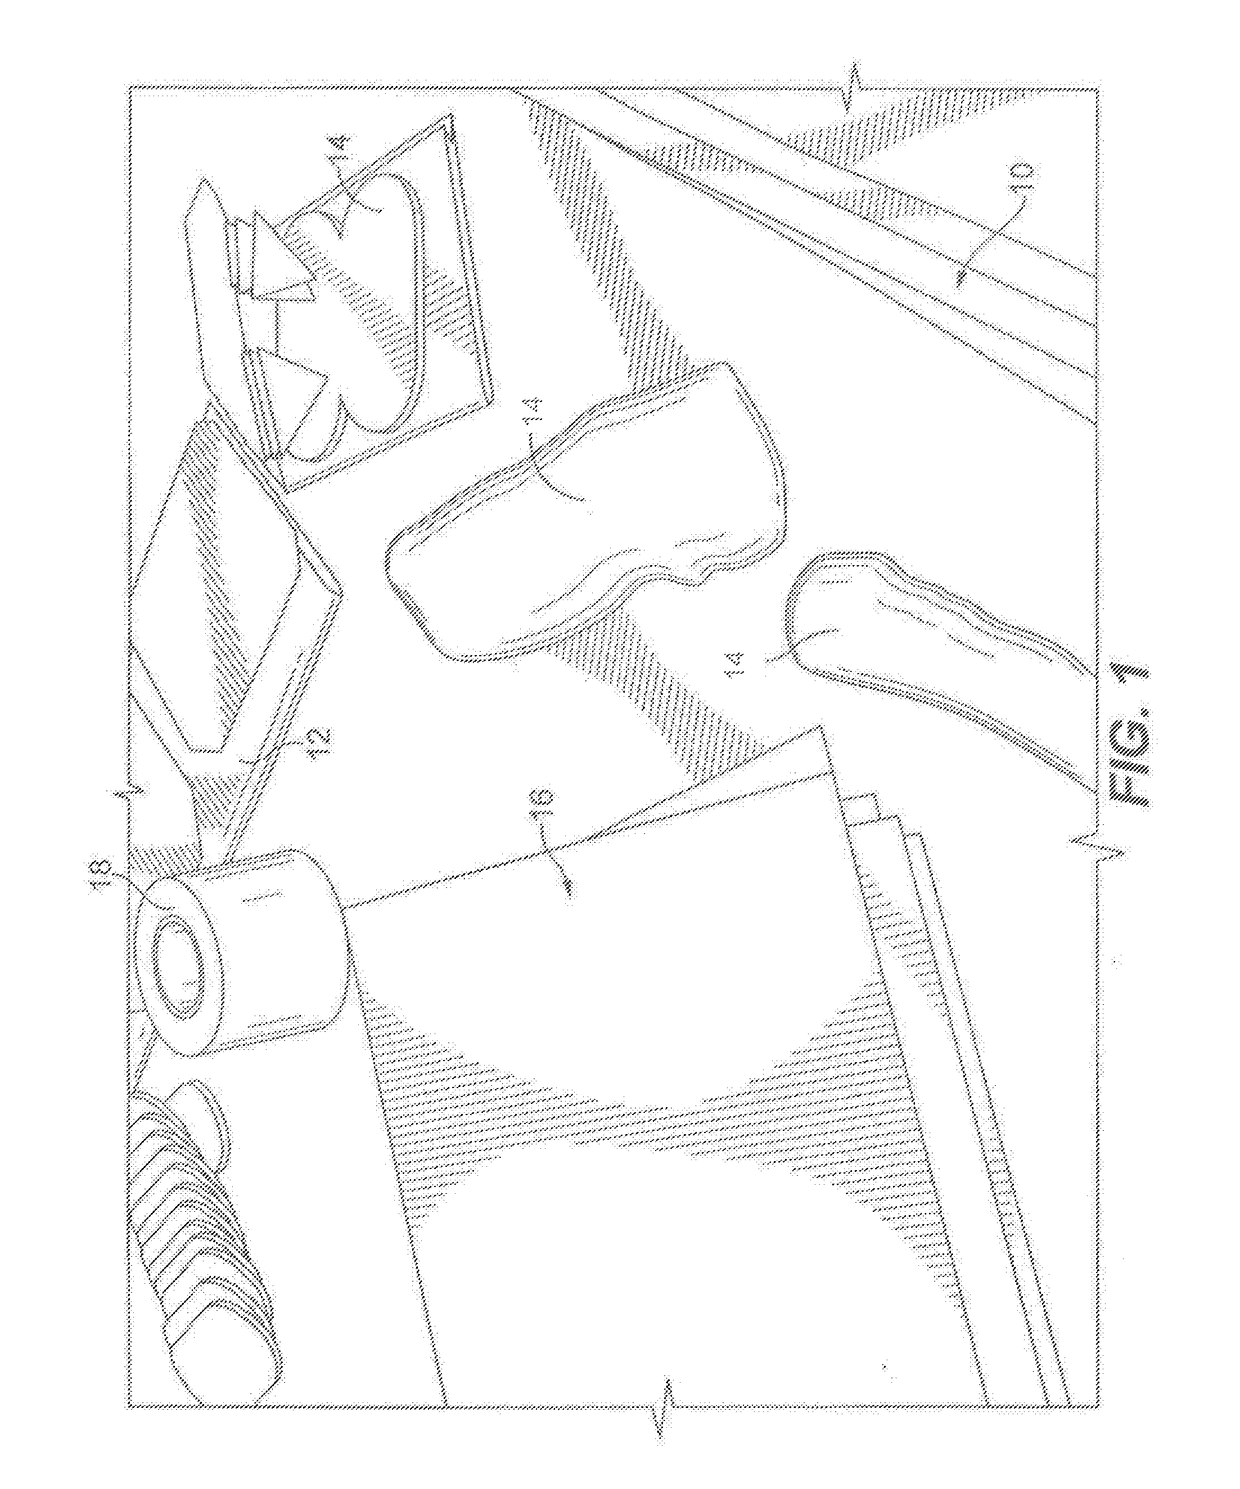 Kit and method for making a wound protection device